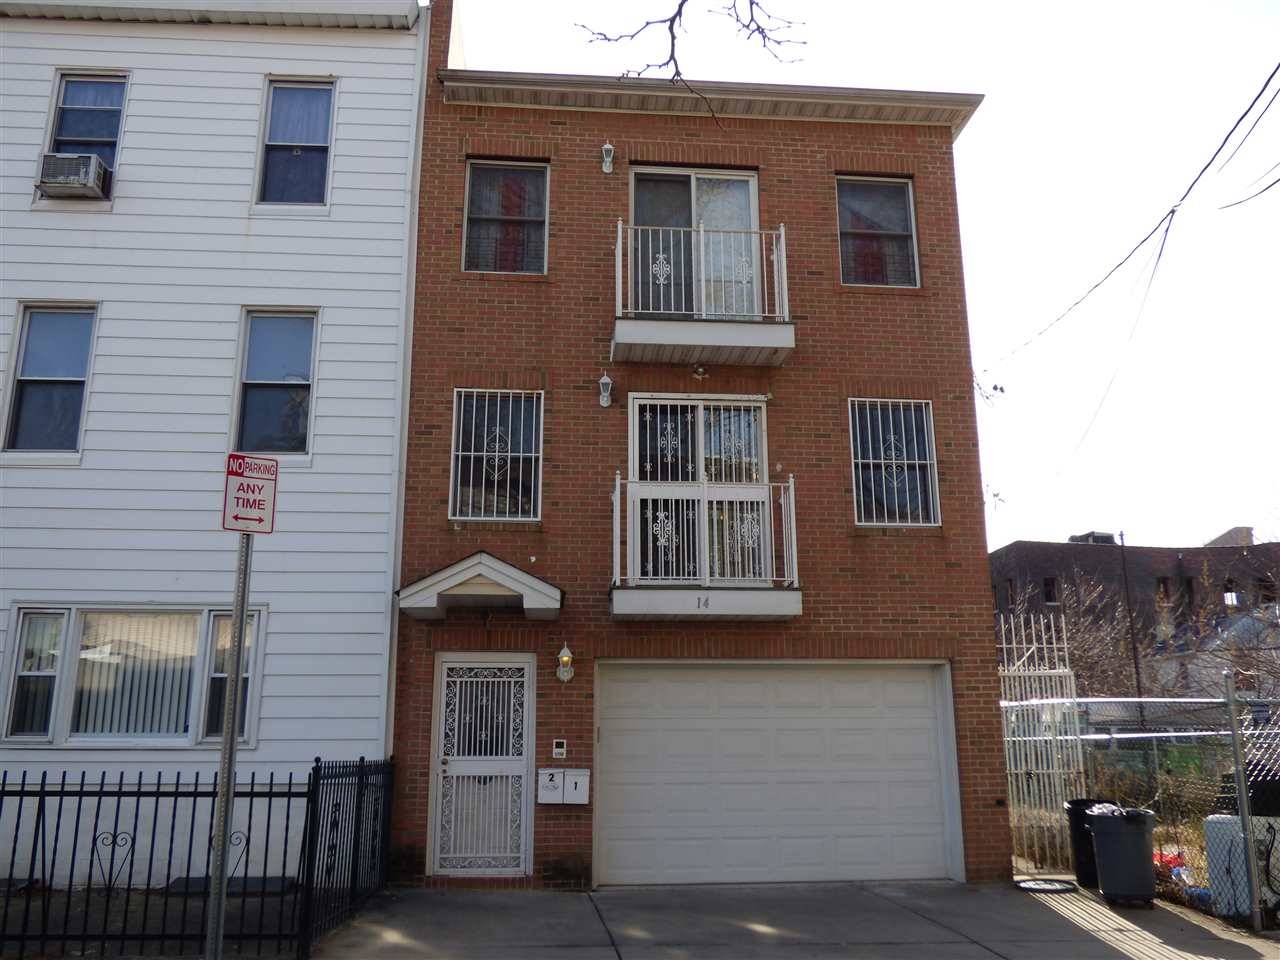 Location - 3 BR New Jersey